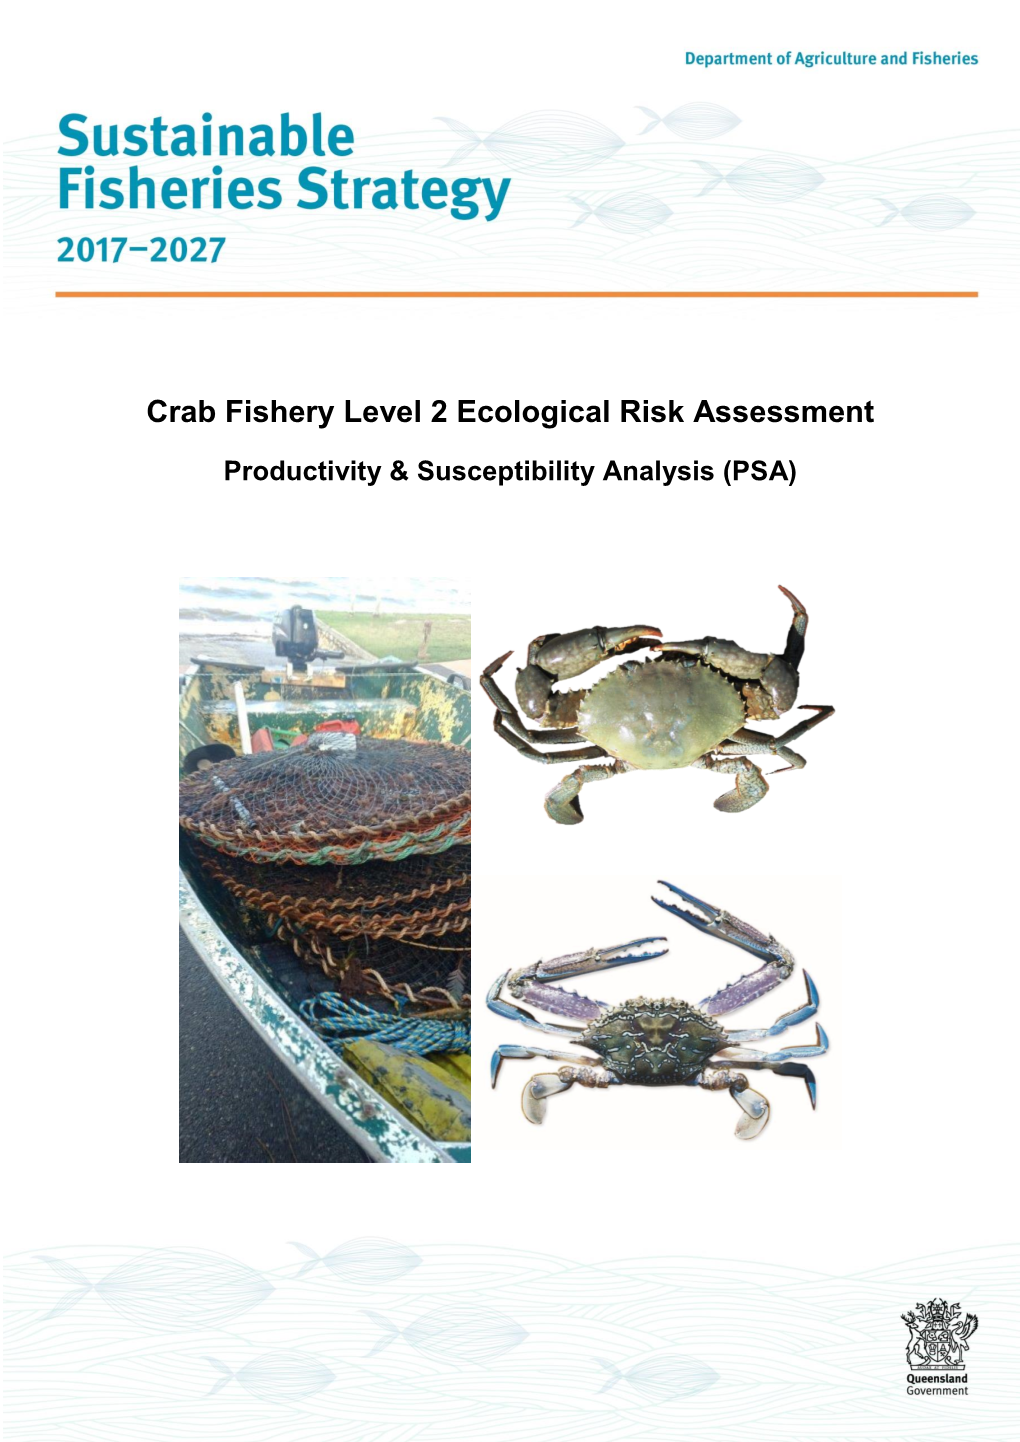 Crab Fishery Level 2 Ecological Risk Assessment